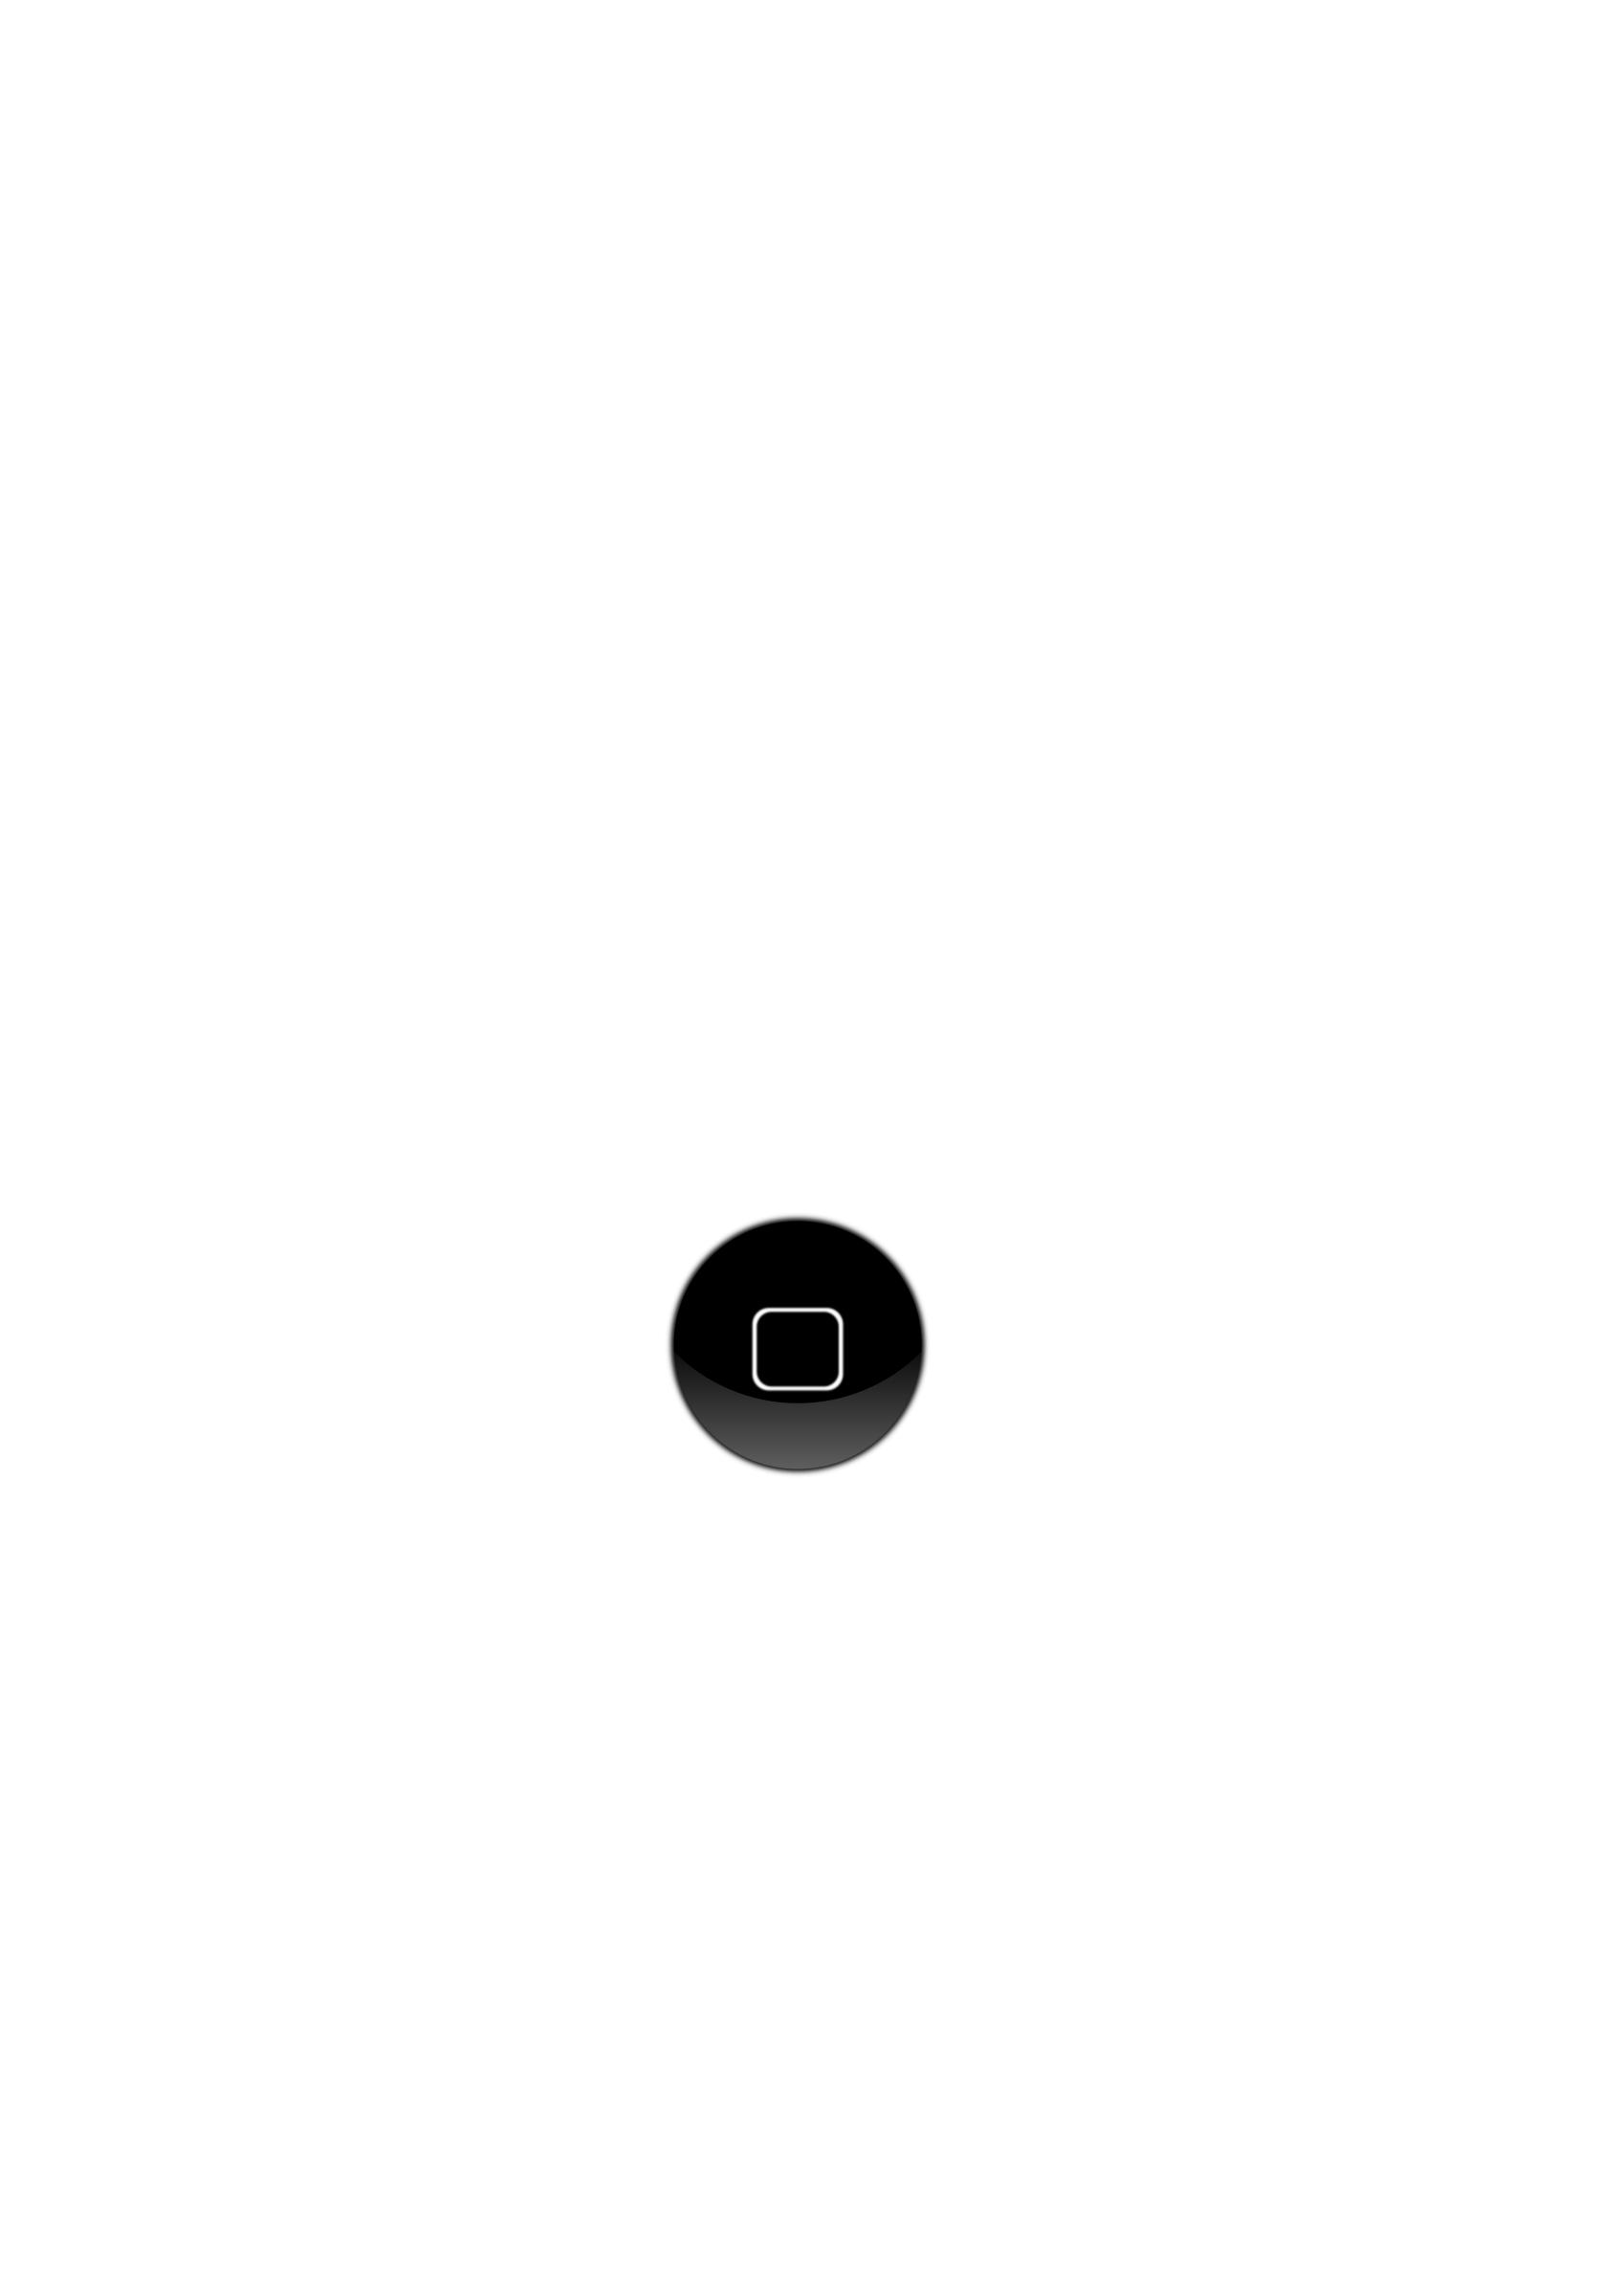 iPhone button png